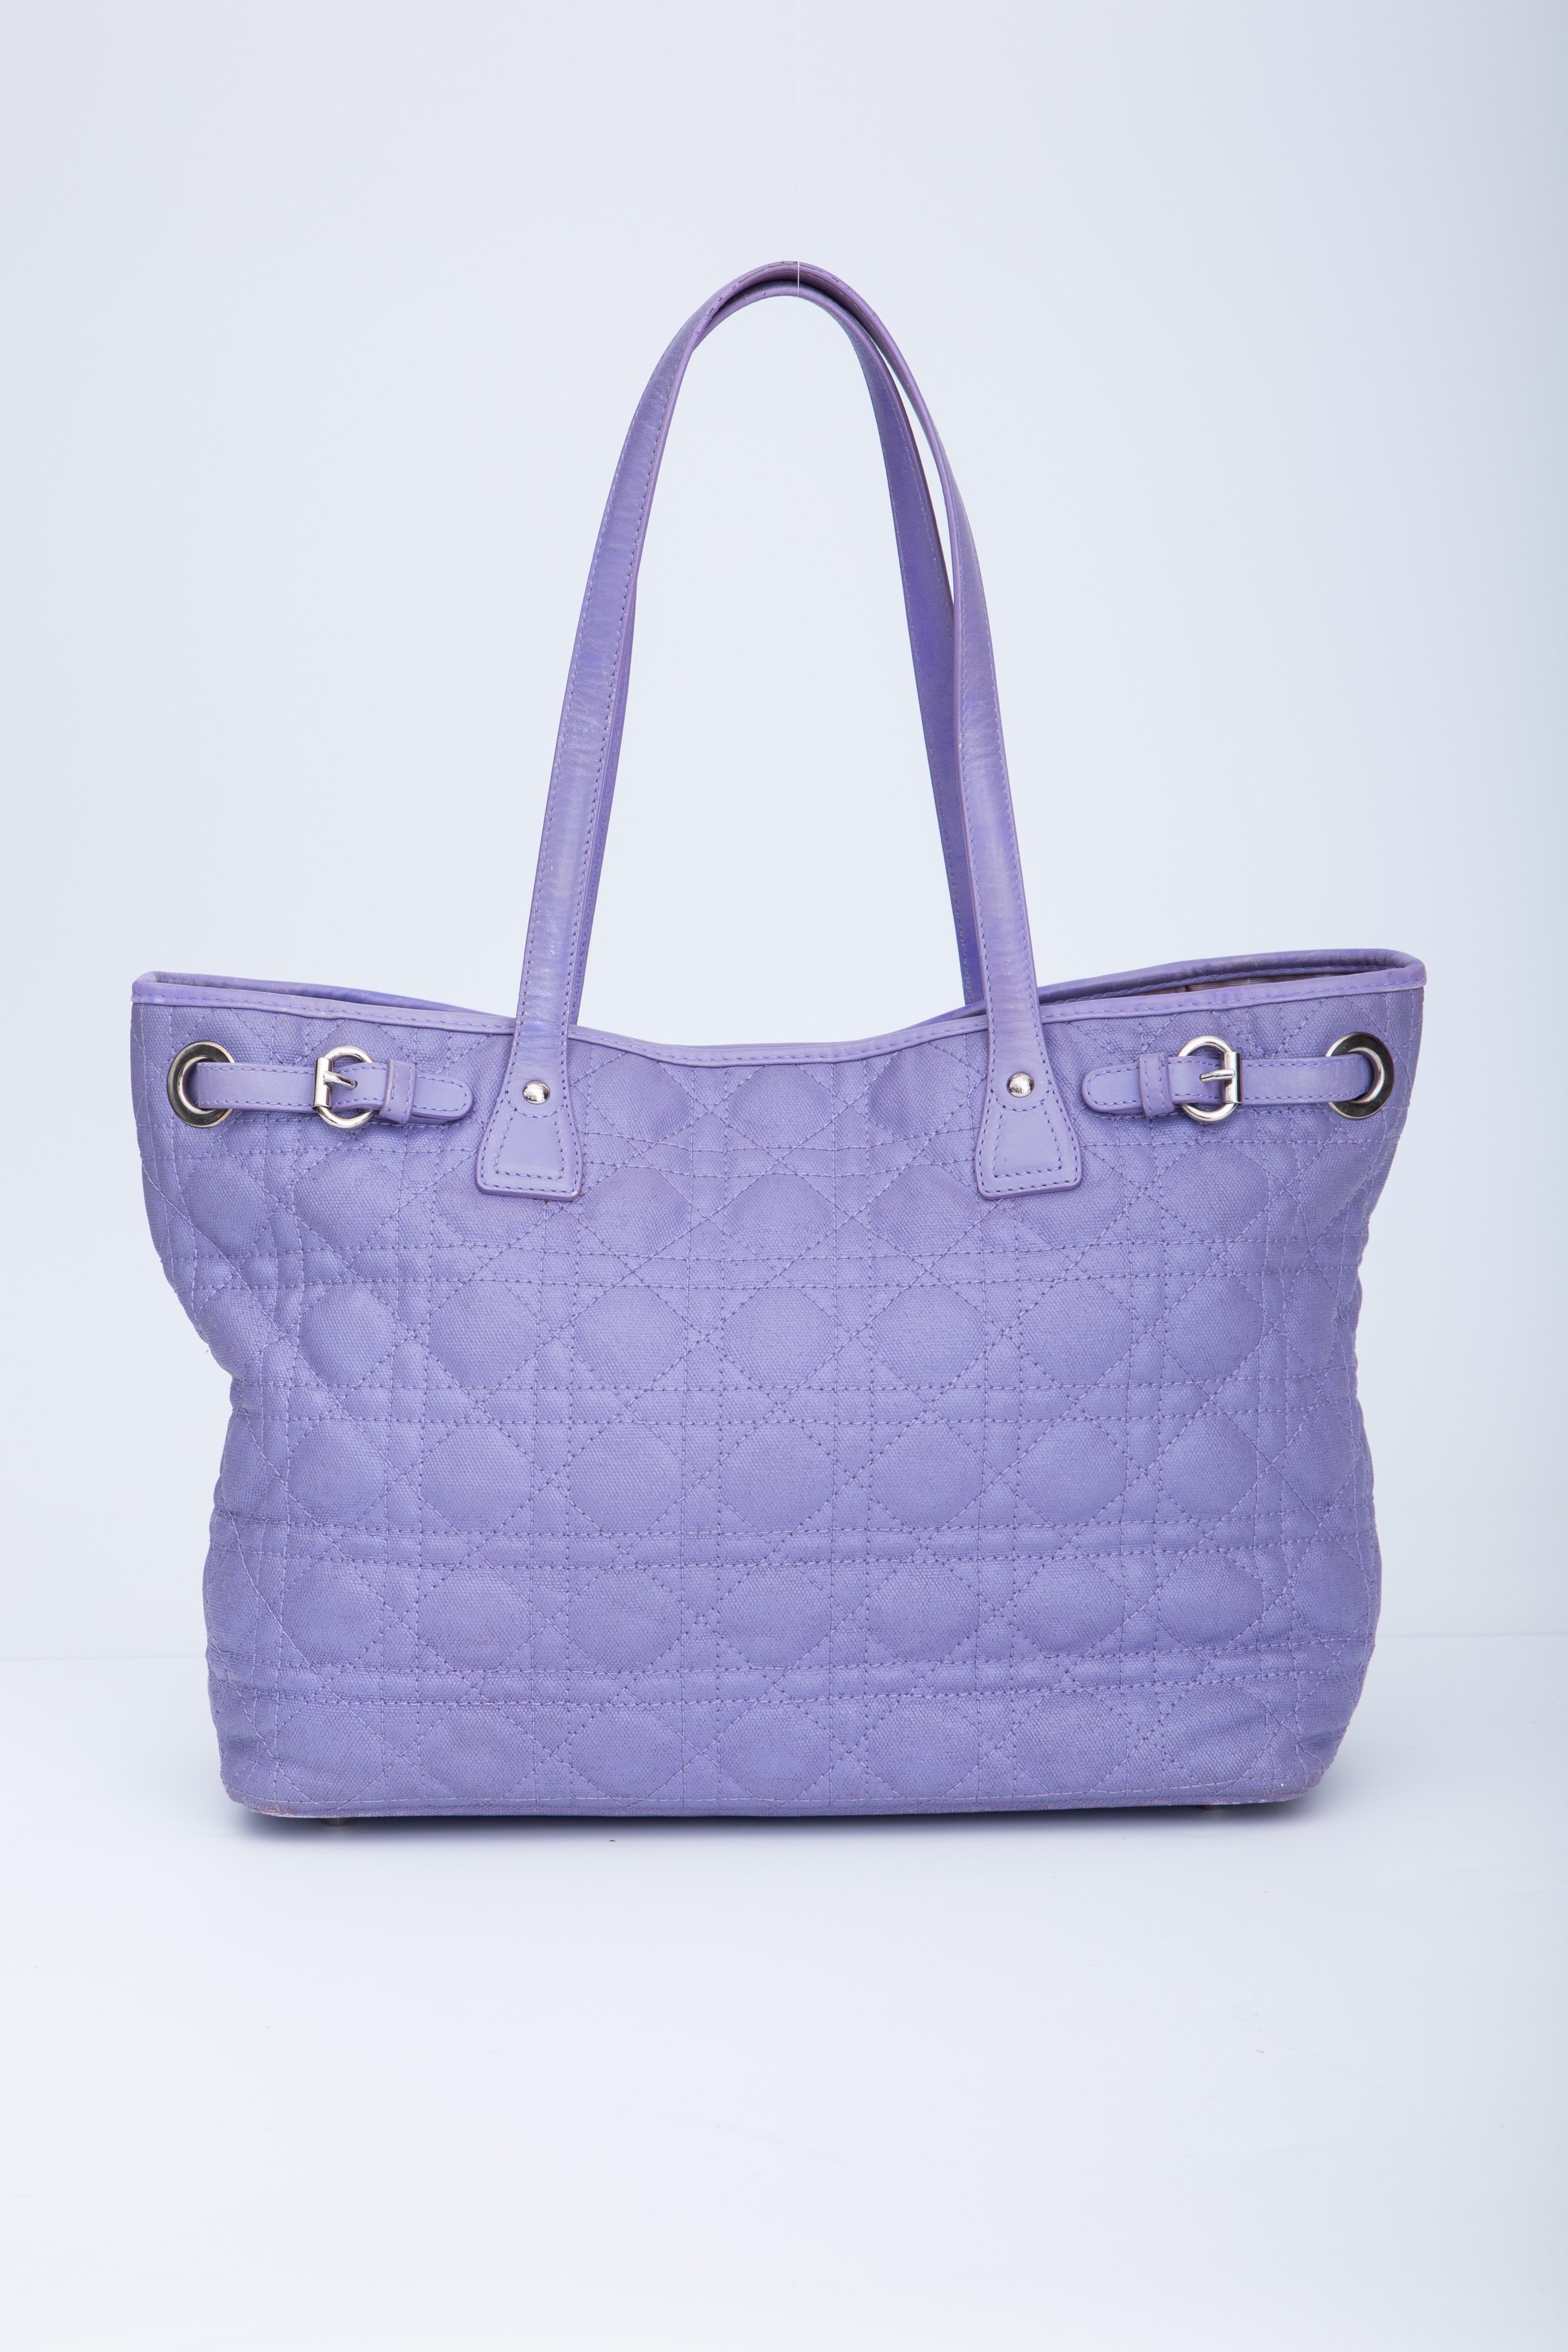 This tote is made of geometric quilted coated canvas in purple. The bag features dual flat leather strap top handles, polished silver hardware including a Dior hanging charm, an open top with snap closure and a purple fabric interior with a zipper